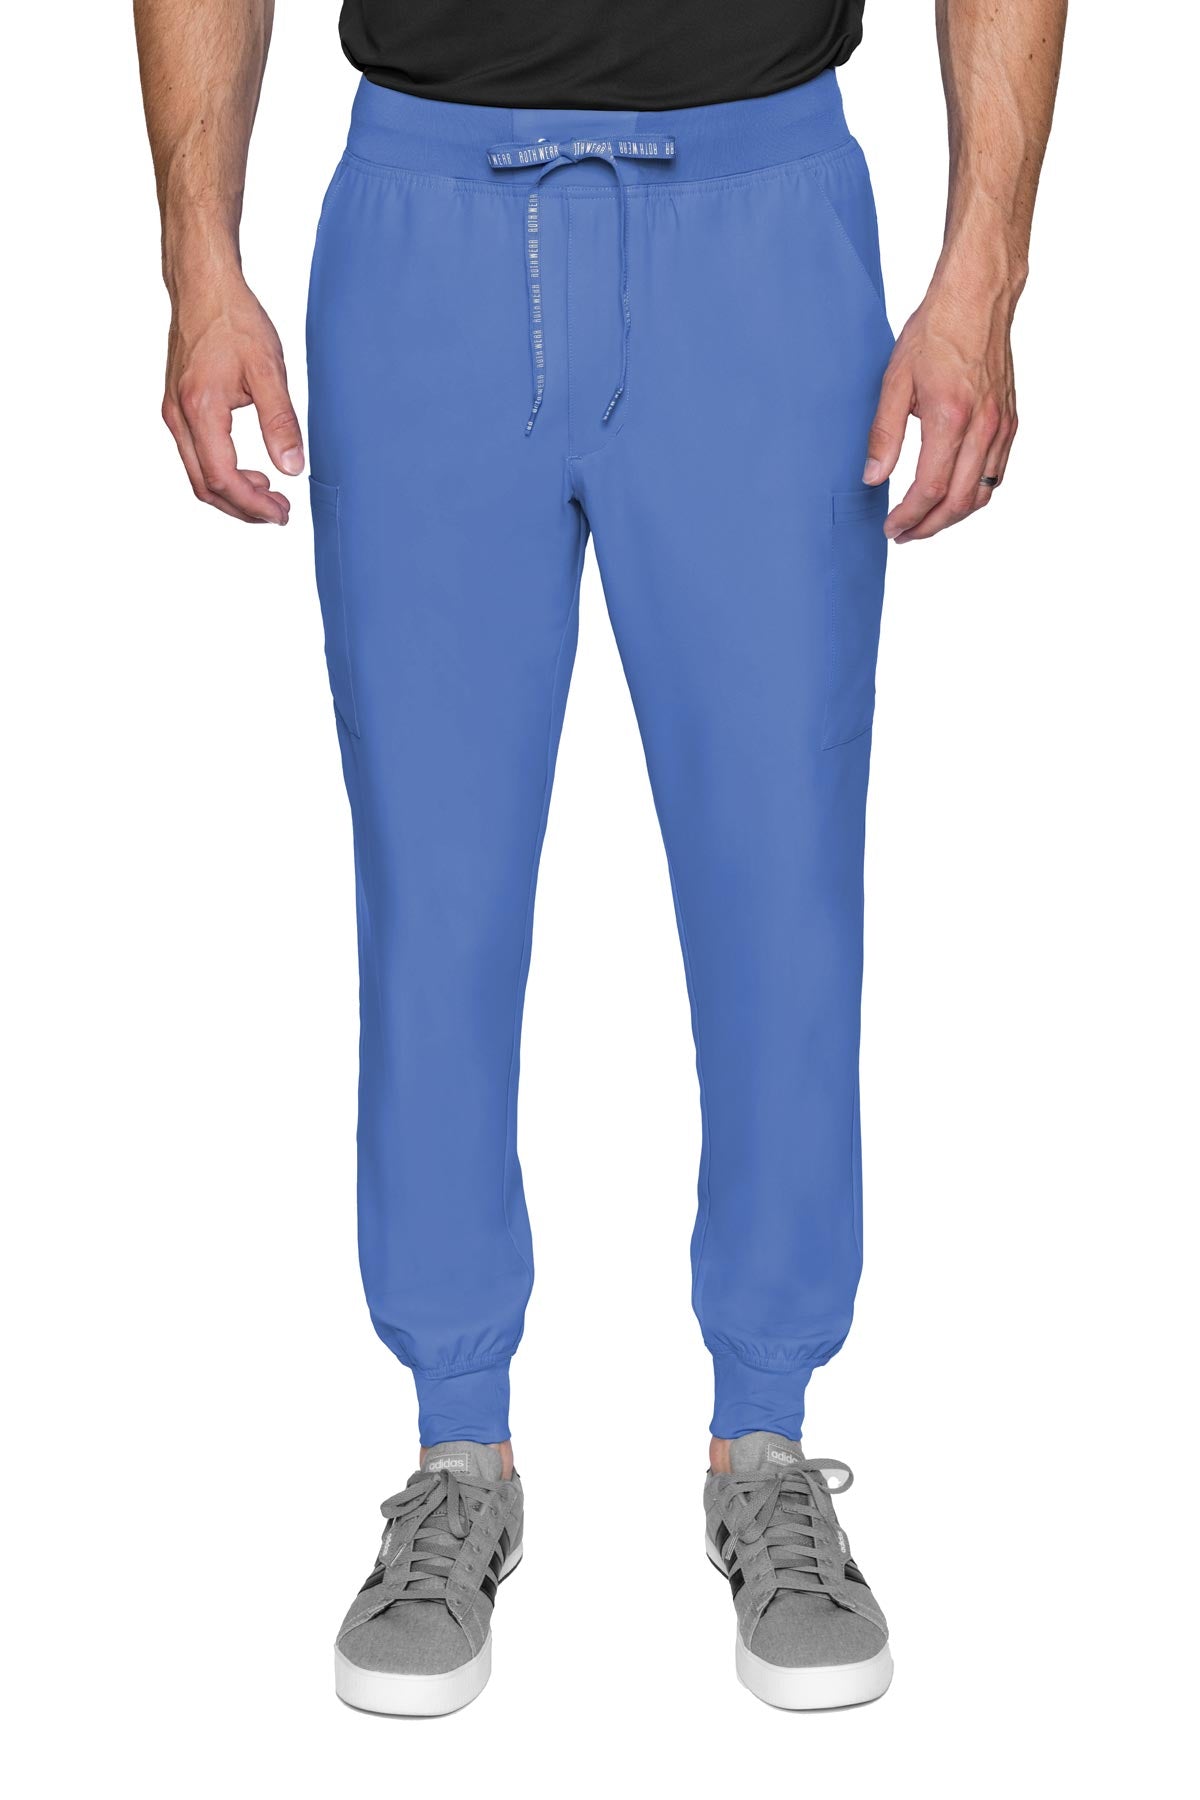 MED COUTURE 2765 Men's Insight Jogger